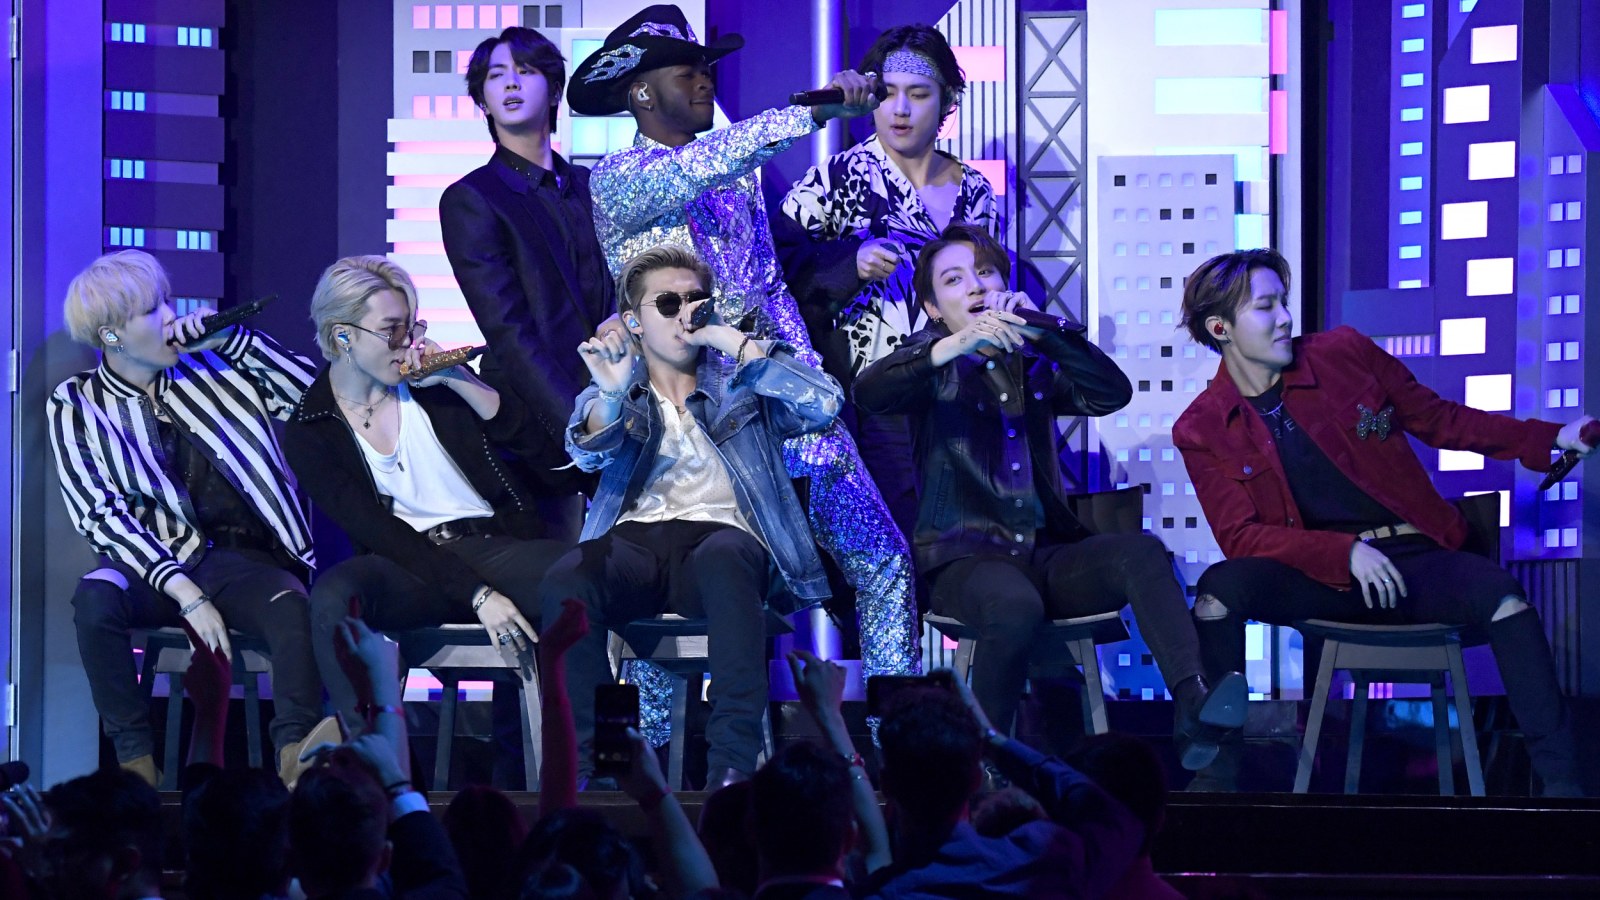 BTS Grammy 2020 Performance: Namjoon, Hobi and Kim Taehyung Trend Following  'Seoul Town Road' Performance With Lil Nas X